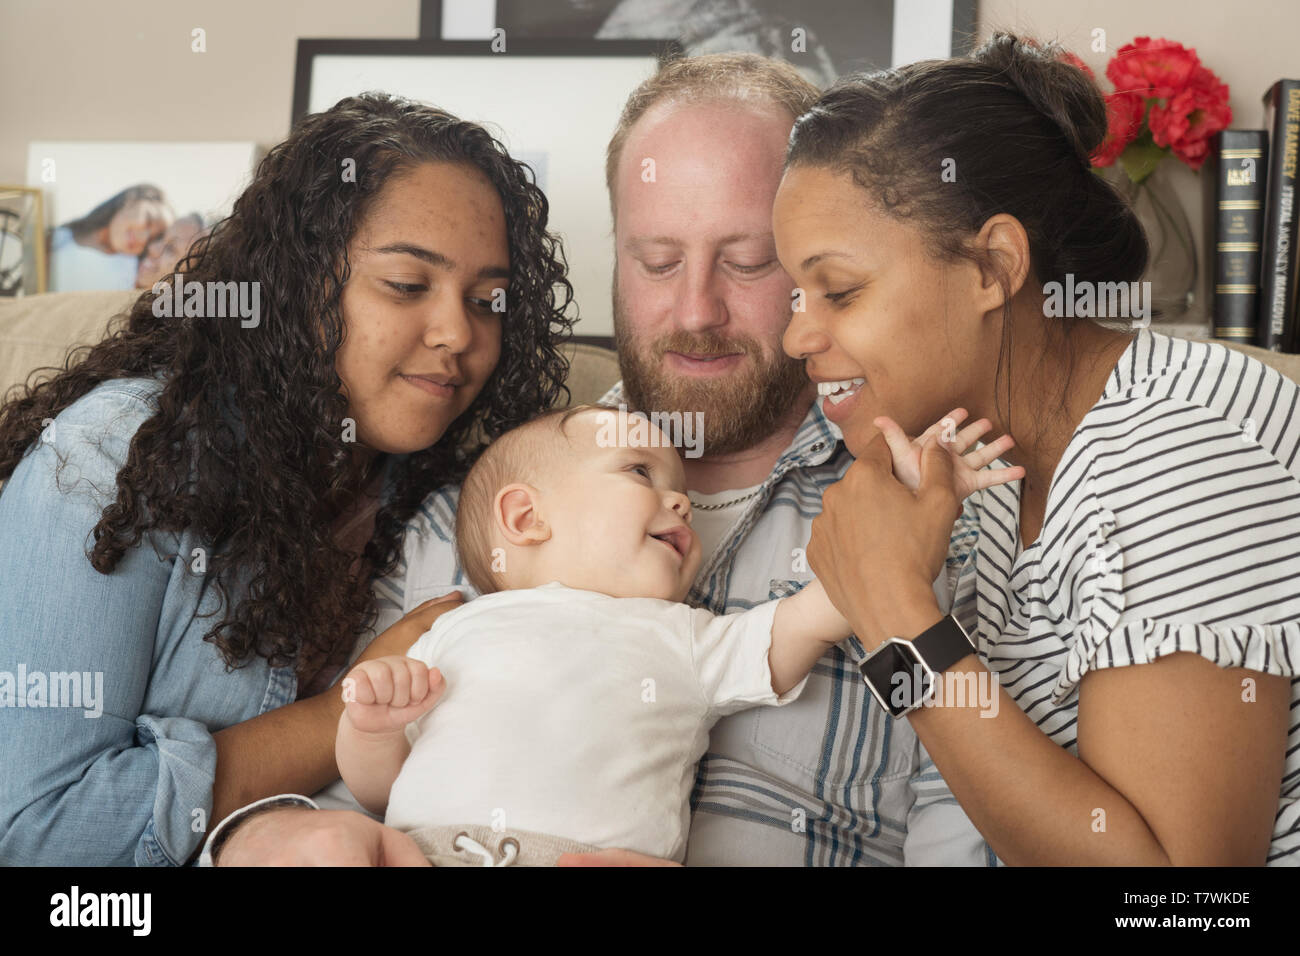 family of  4 in their home in north Philadelphia, 6 month old baby, 15 year old sister. Stock Photo